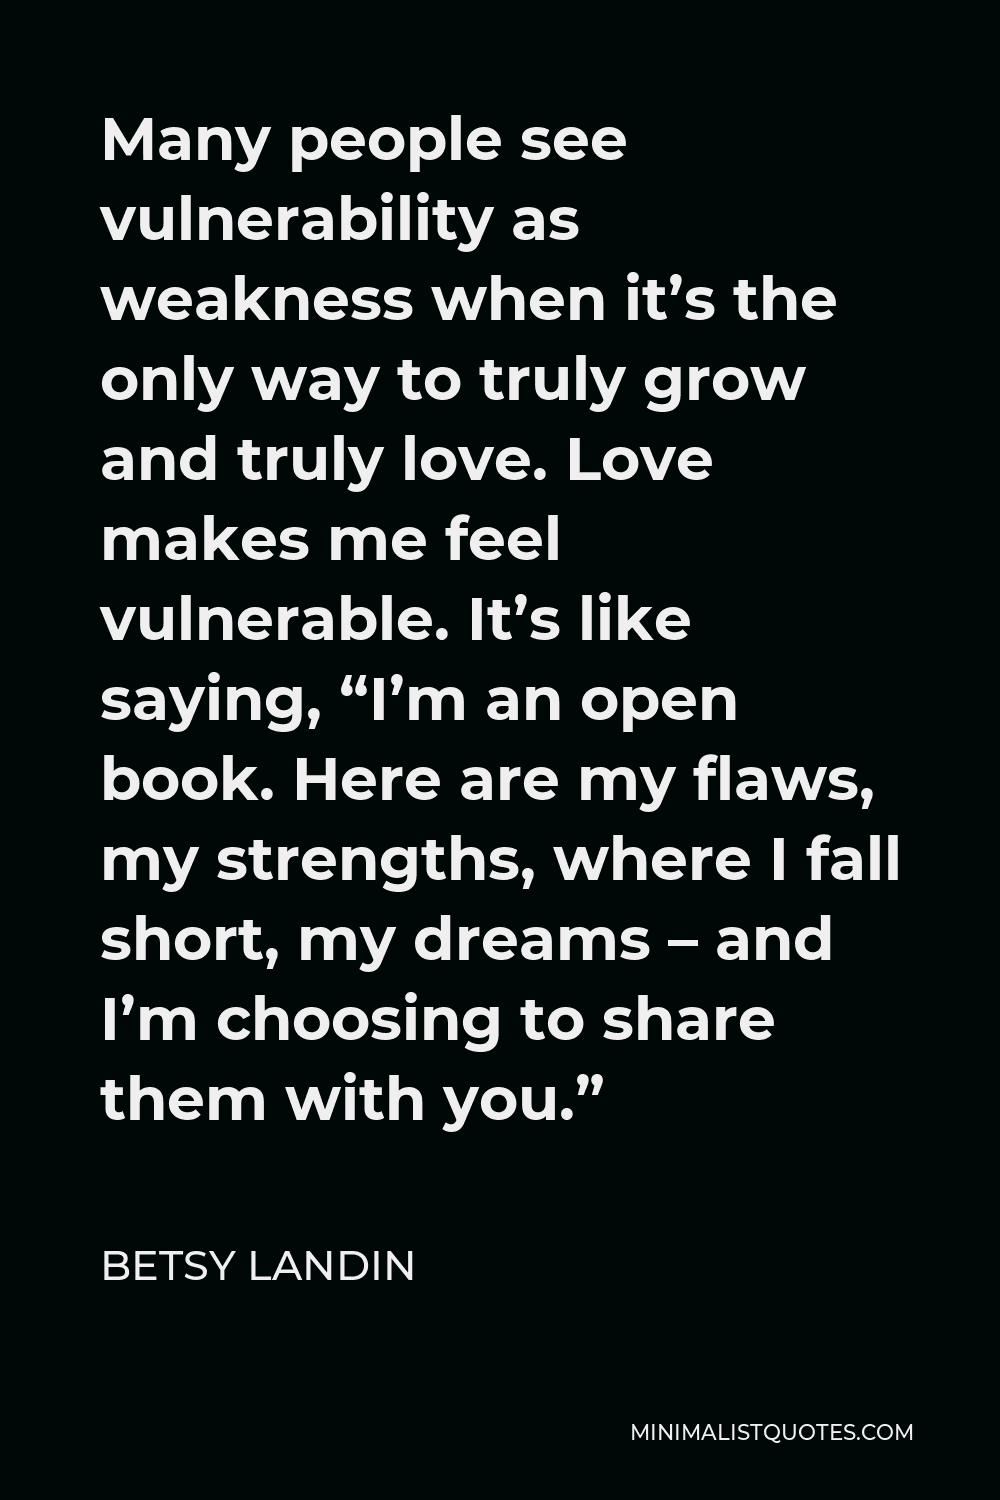 Betsy Landin Quote - Many people see vulnerability as weakness when it’s the only way to truly grow and truly love. Love makes me feel vulnerable. It’s like saying, “I’m an open book. Here are my flaws, my strengths, where I fall short, my dreams – and I’m choosing to share them with you.”